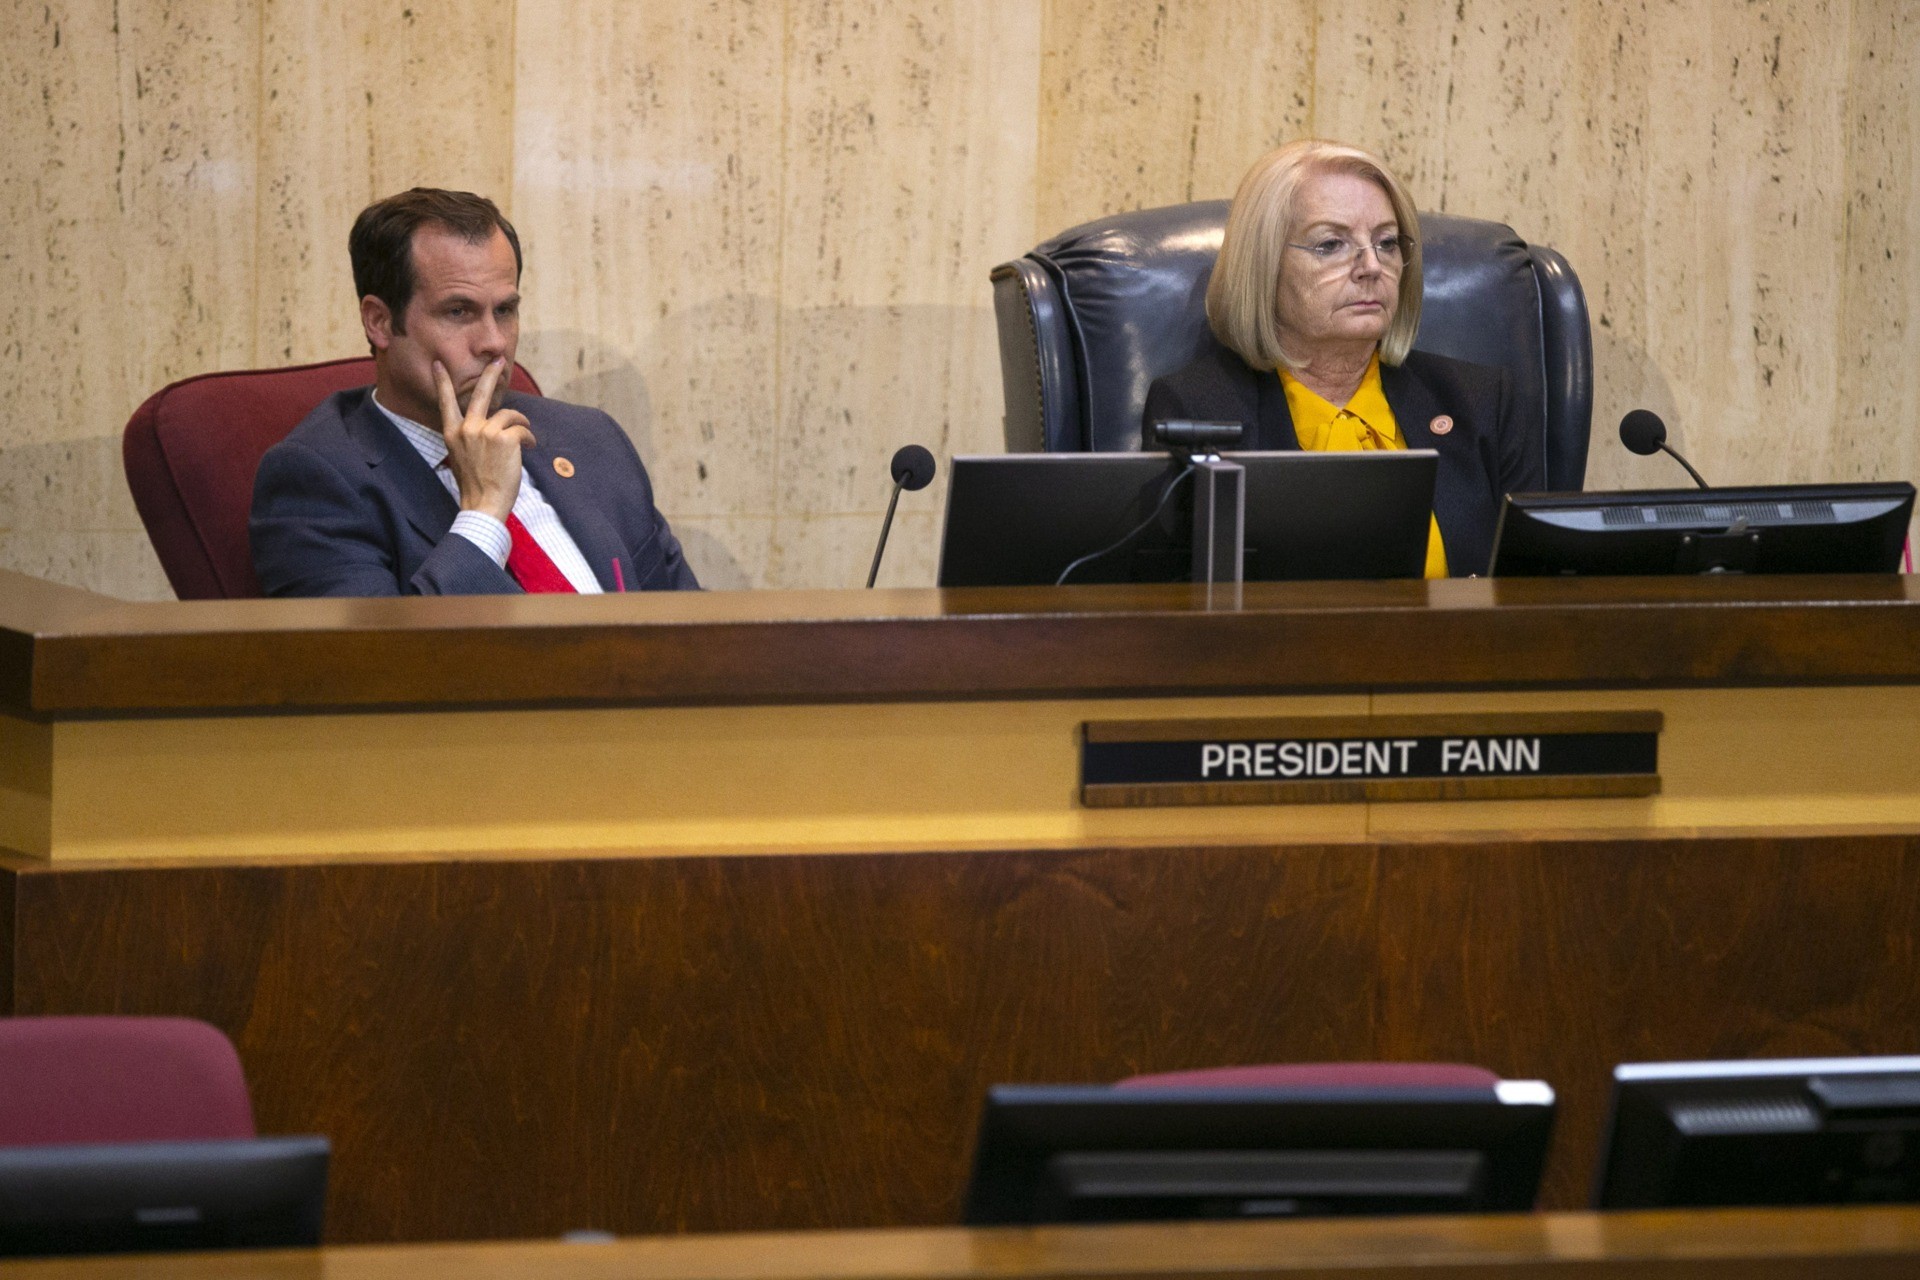 Senate President Karen Fann and Senate Judiciary Chairman Warren Petersen, the majority leader, listen during the presentation of the report on the election audit to Arizona lawmakers in the Senate chambers of the Arizona Capitol in Phoenix on Sept. 24, 2021.